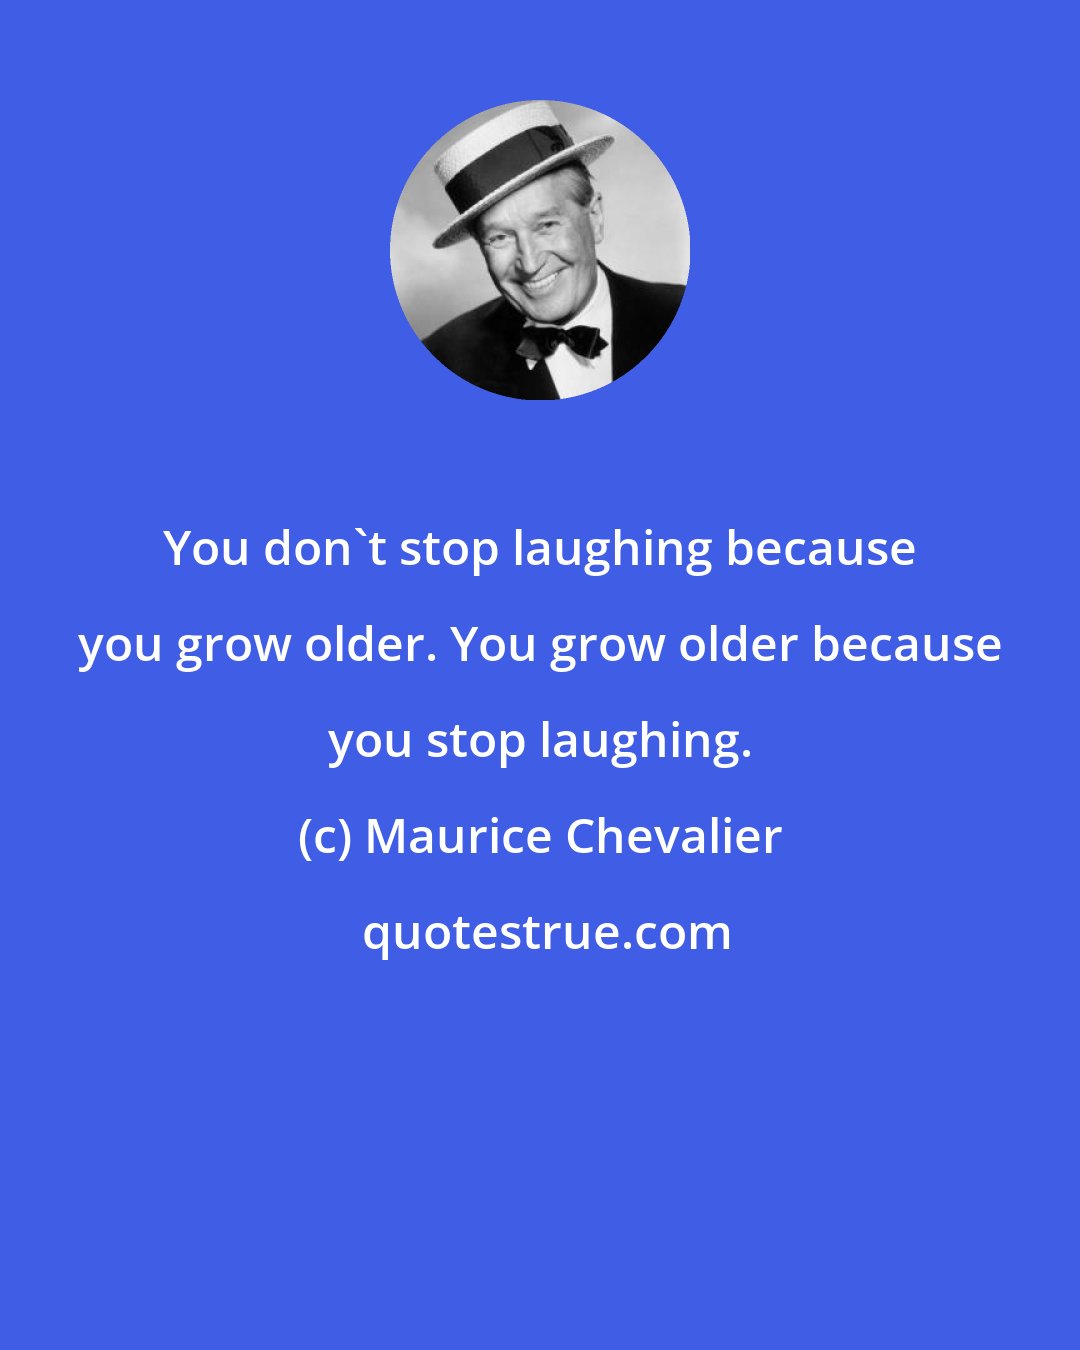 Maurice Chevalier: You don't stop laughing because you grow older. You grow older because you stop laughing.